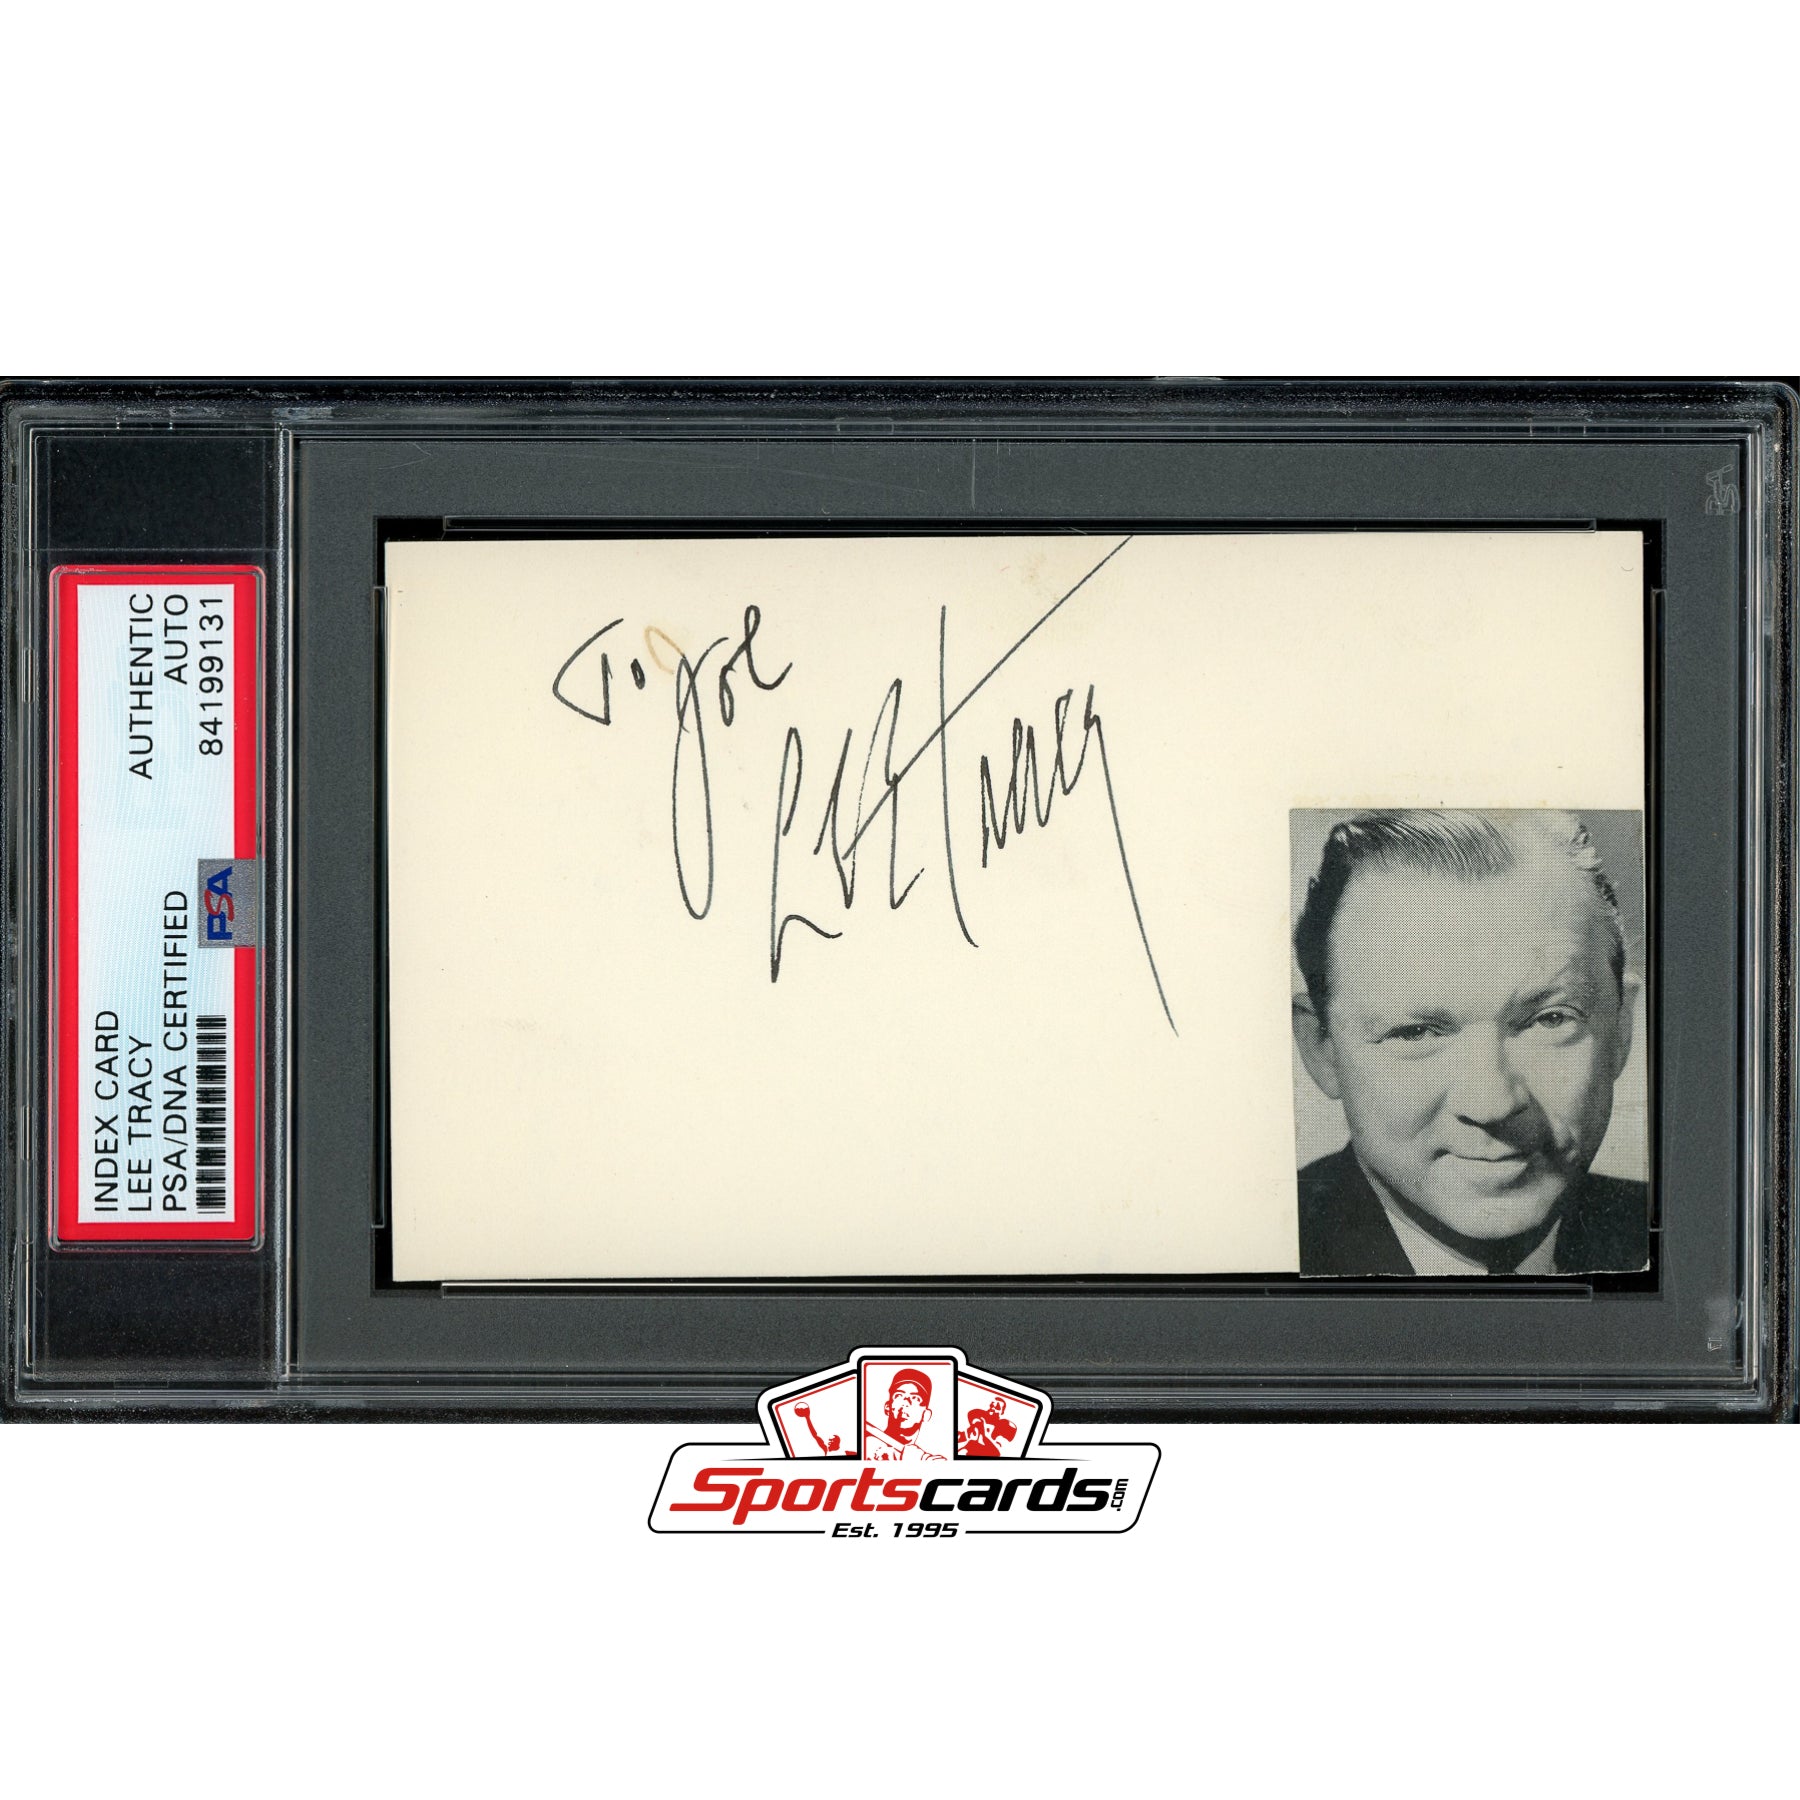 Lee Tracy (d.1968) Signed Auto 3x5 Index Card PSA/DNA Actor The Best Man